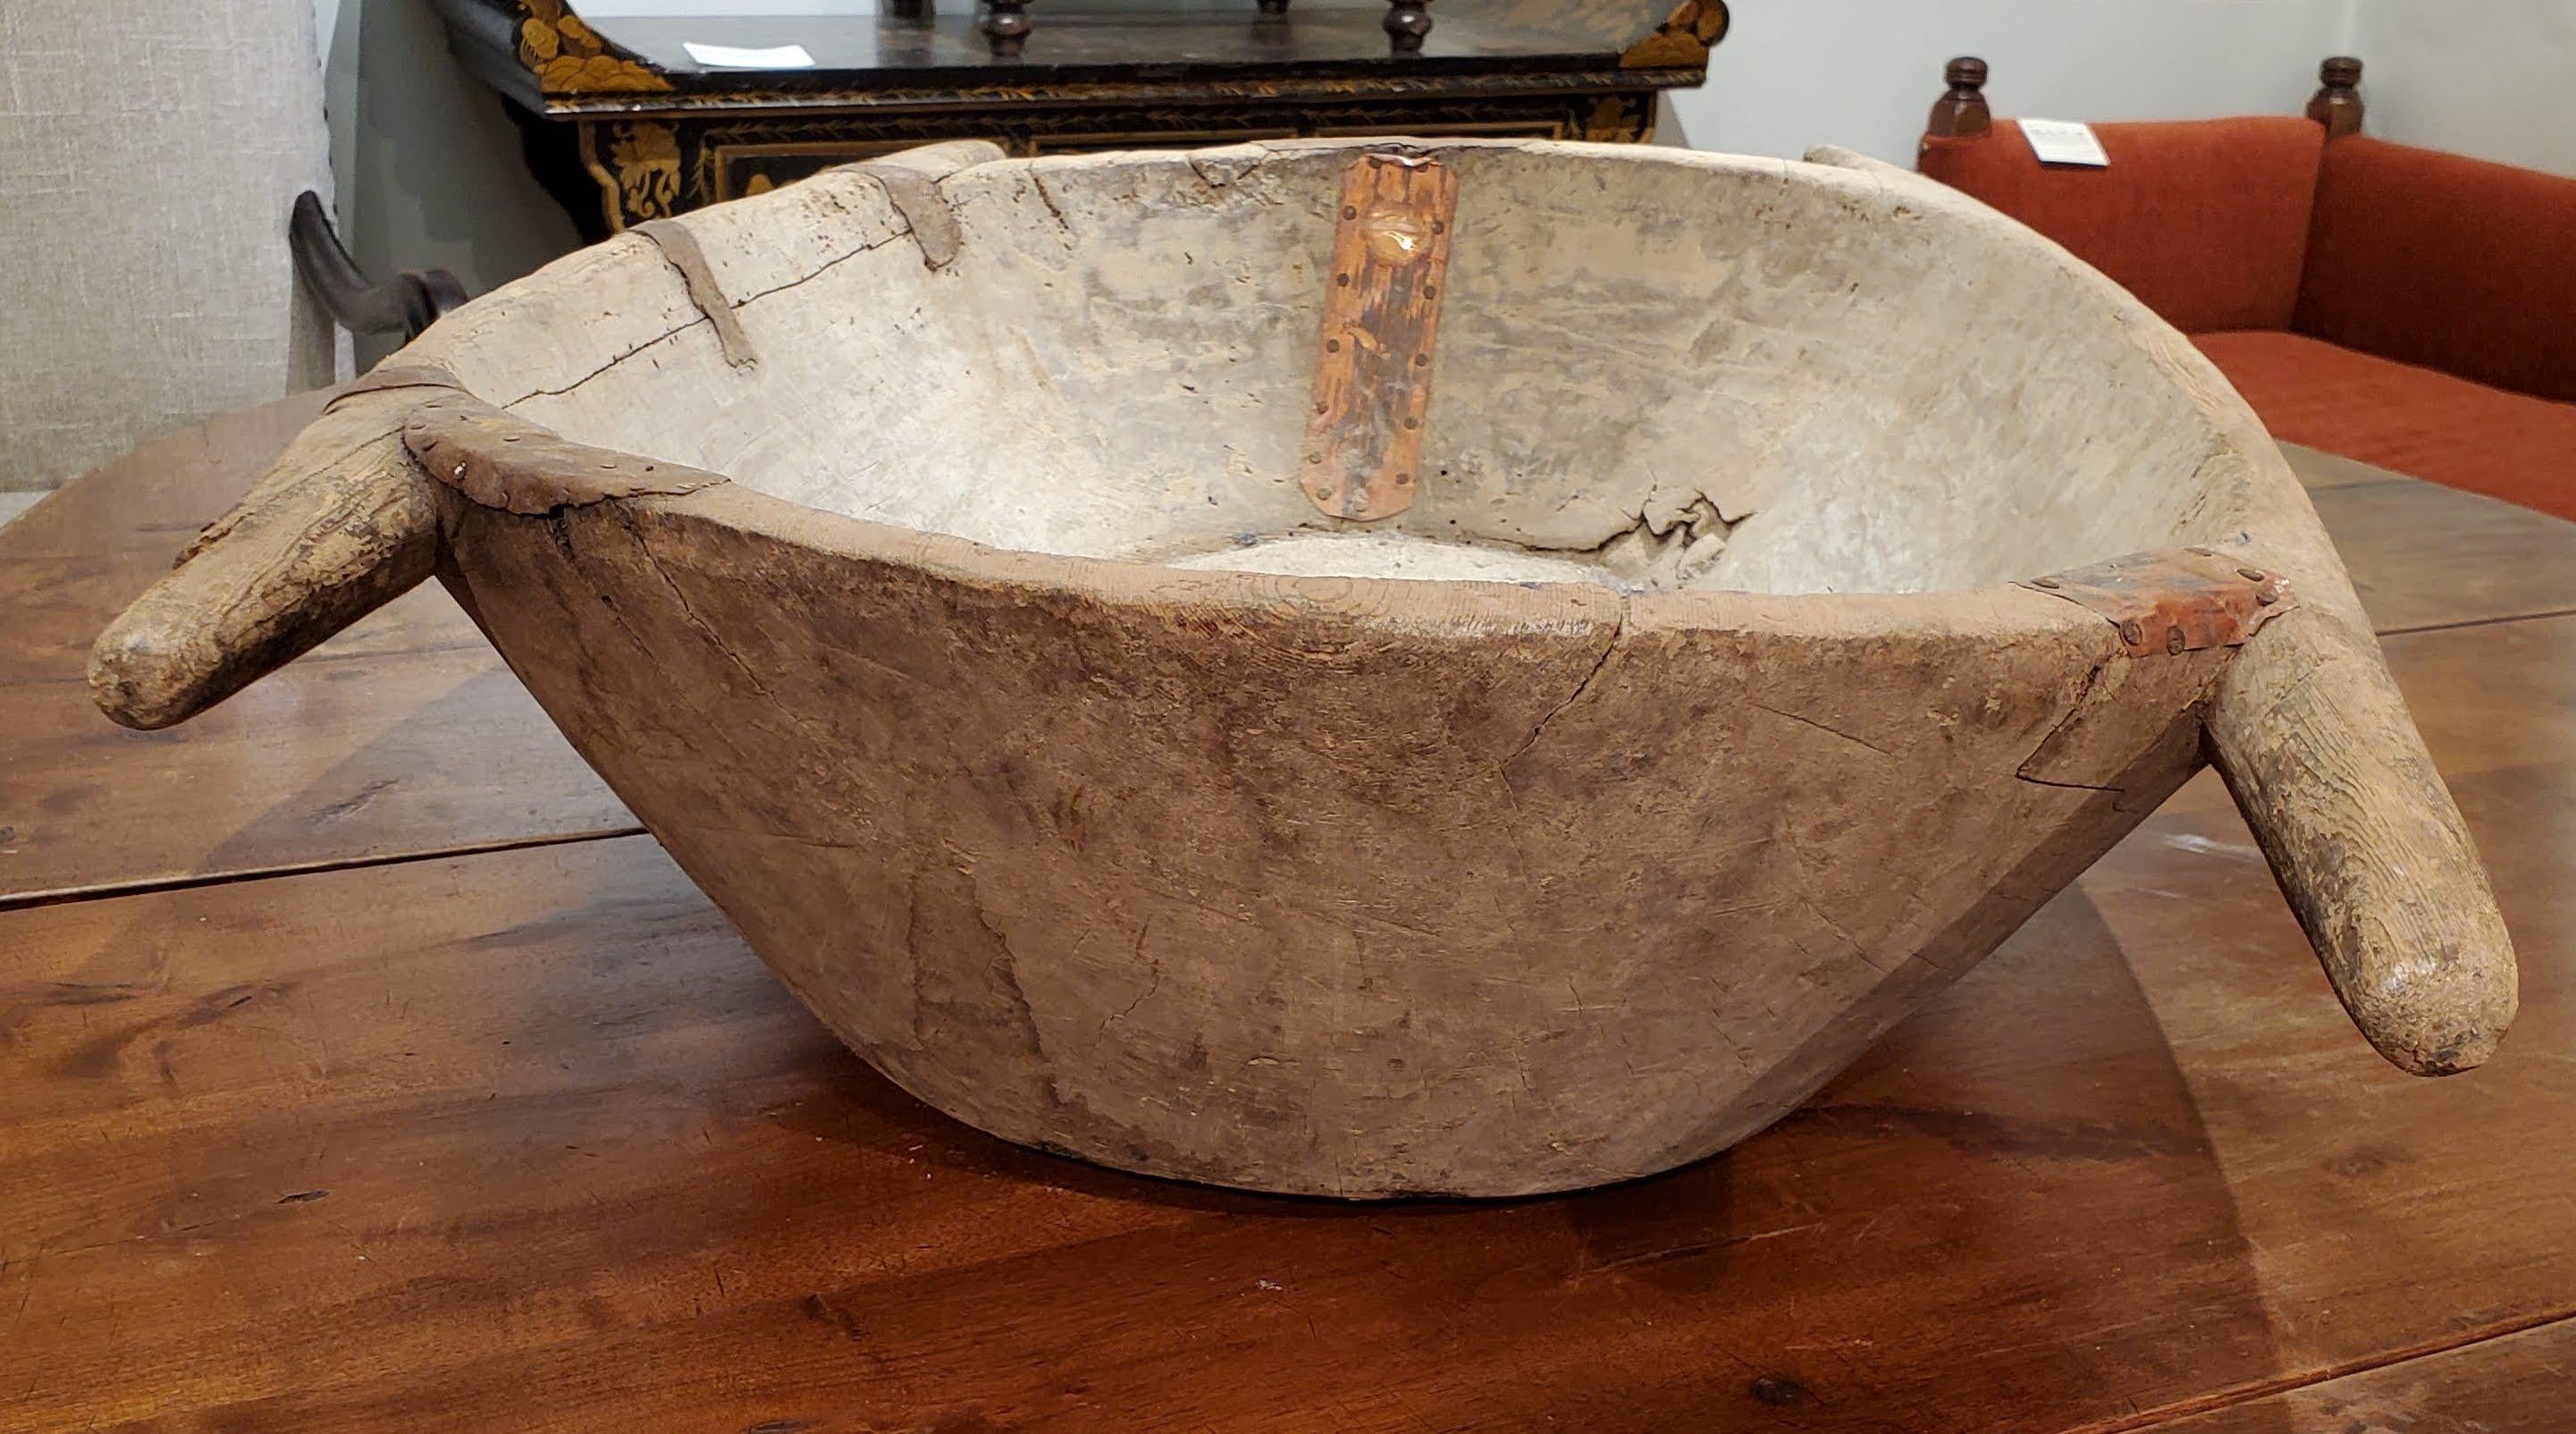 Unusually Large 19th Century Turkish Dough Bowl. Carved from one piece of wood with four handles. Used to kneed dough and let it rise Turkey, circa 1890.
Measures: 7” H 36” W 19.5” D